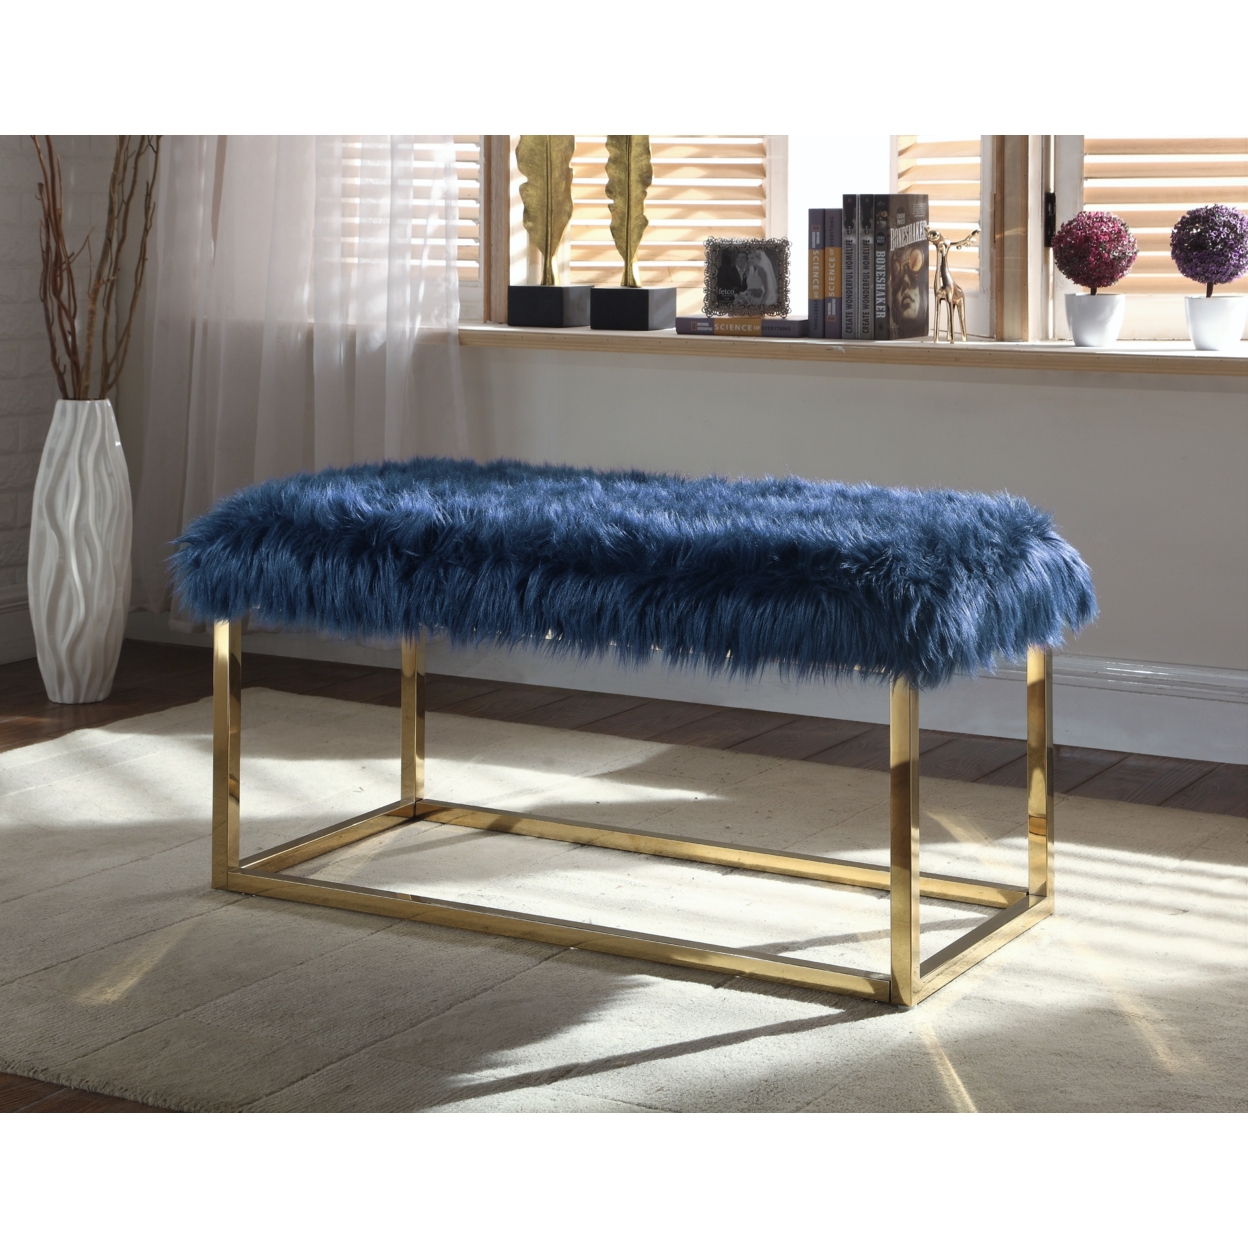 Audrey Bench Ottoman Faux Fur Brass Finished Stainless Steel Metal Frame - Navy